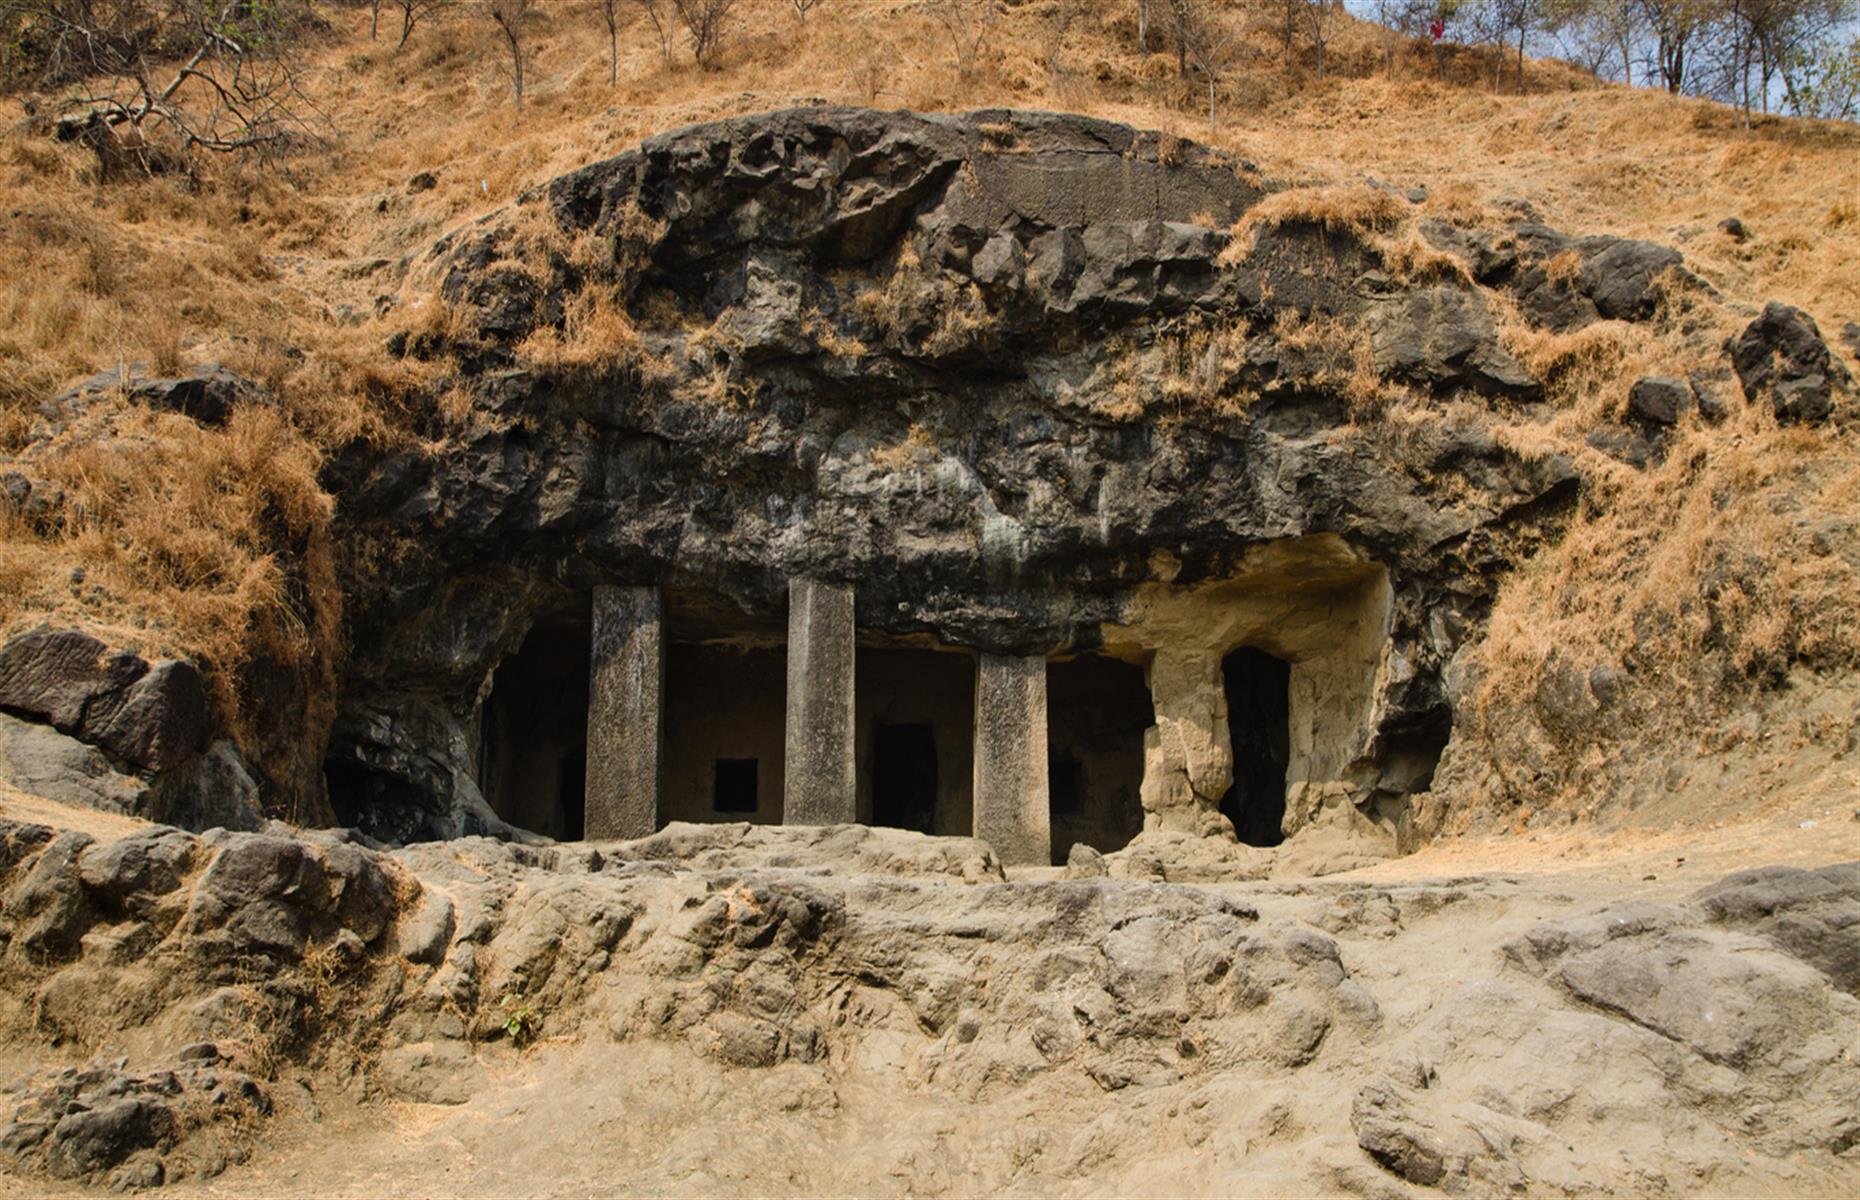 <p>An ancient complex of rock-cut caves, rich in Hindu and Buddhist art and statues, has been identified as a World Heritage Site at risk as a result of rising sea levels in a report by UNESCO. Found on Elephanta Island in Mumbai Harbour, the caves are one of the coastal city’s many treasures that are facing serious threat due to climate change with rising seas and an increased frequency of extreme weather events. In 2021, the state of Maharashtra was hit with its worst July monsoon in 40 years.</p>